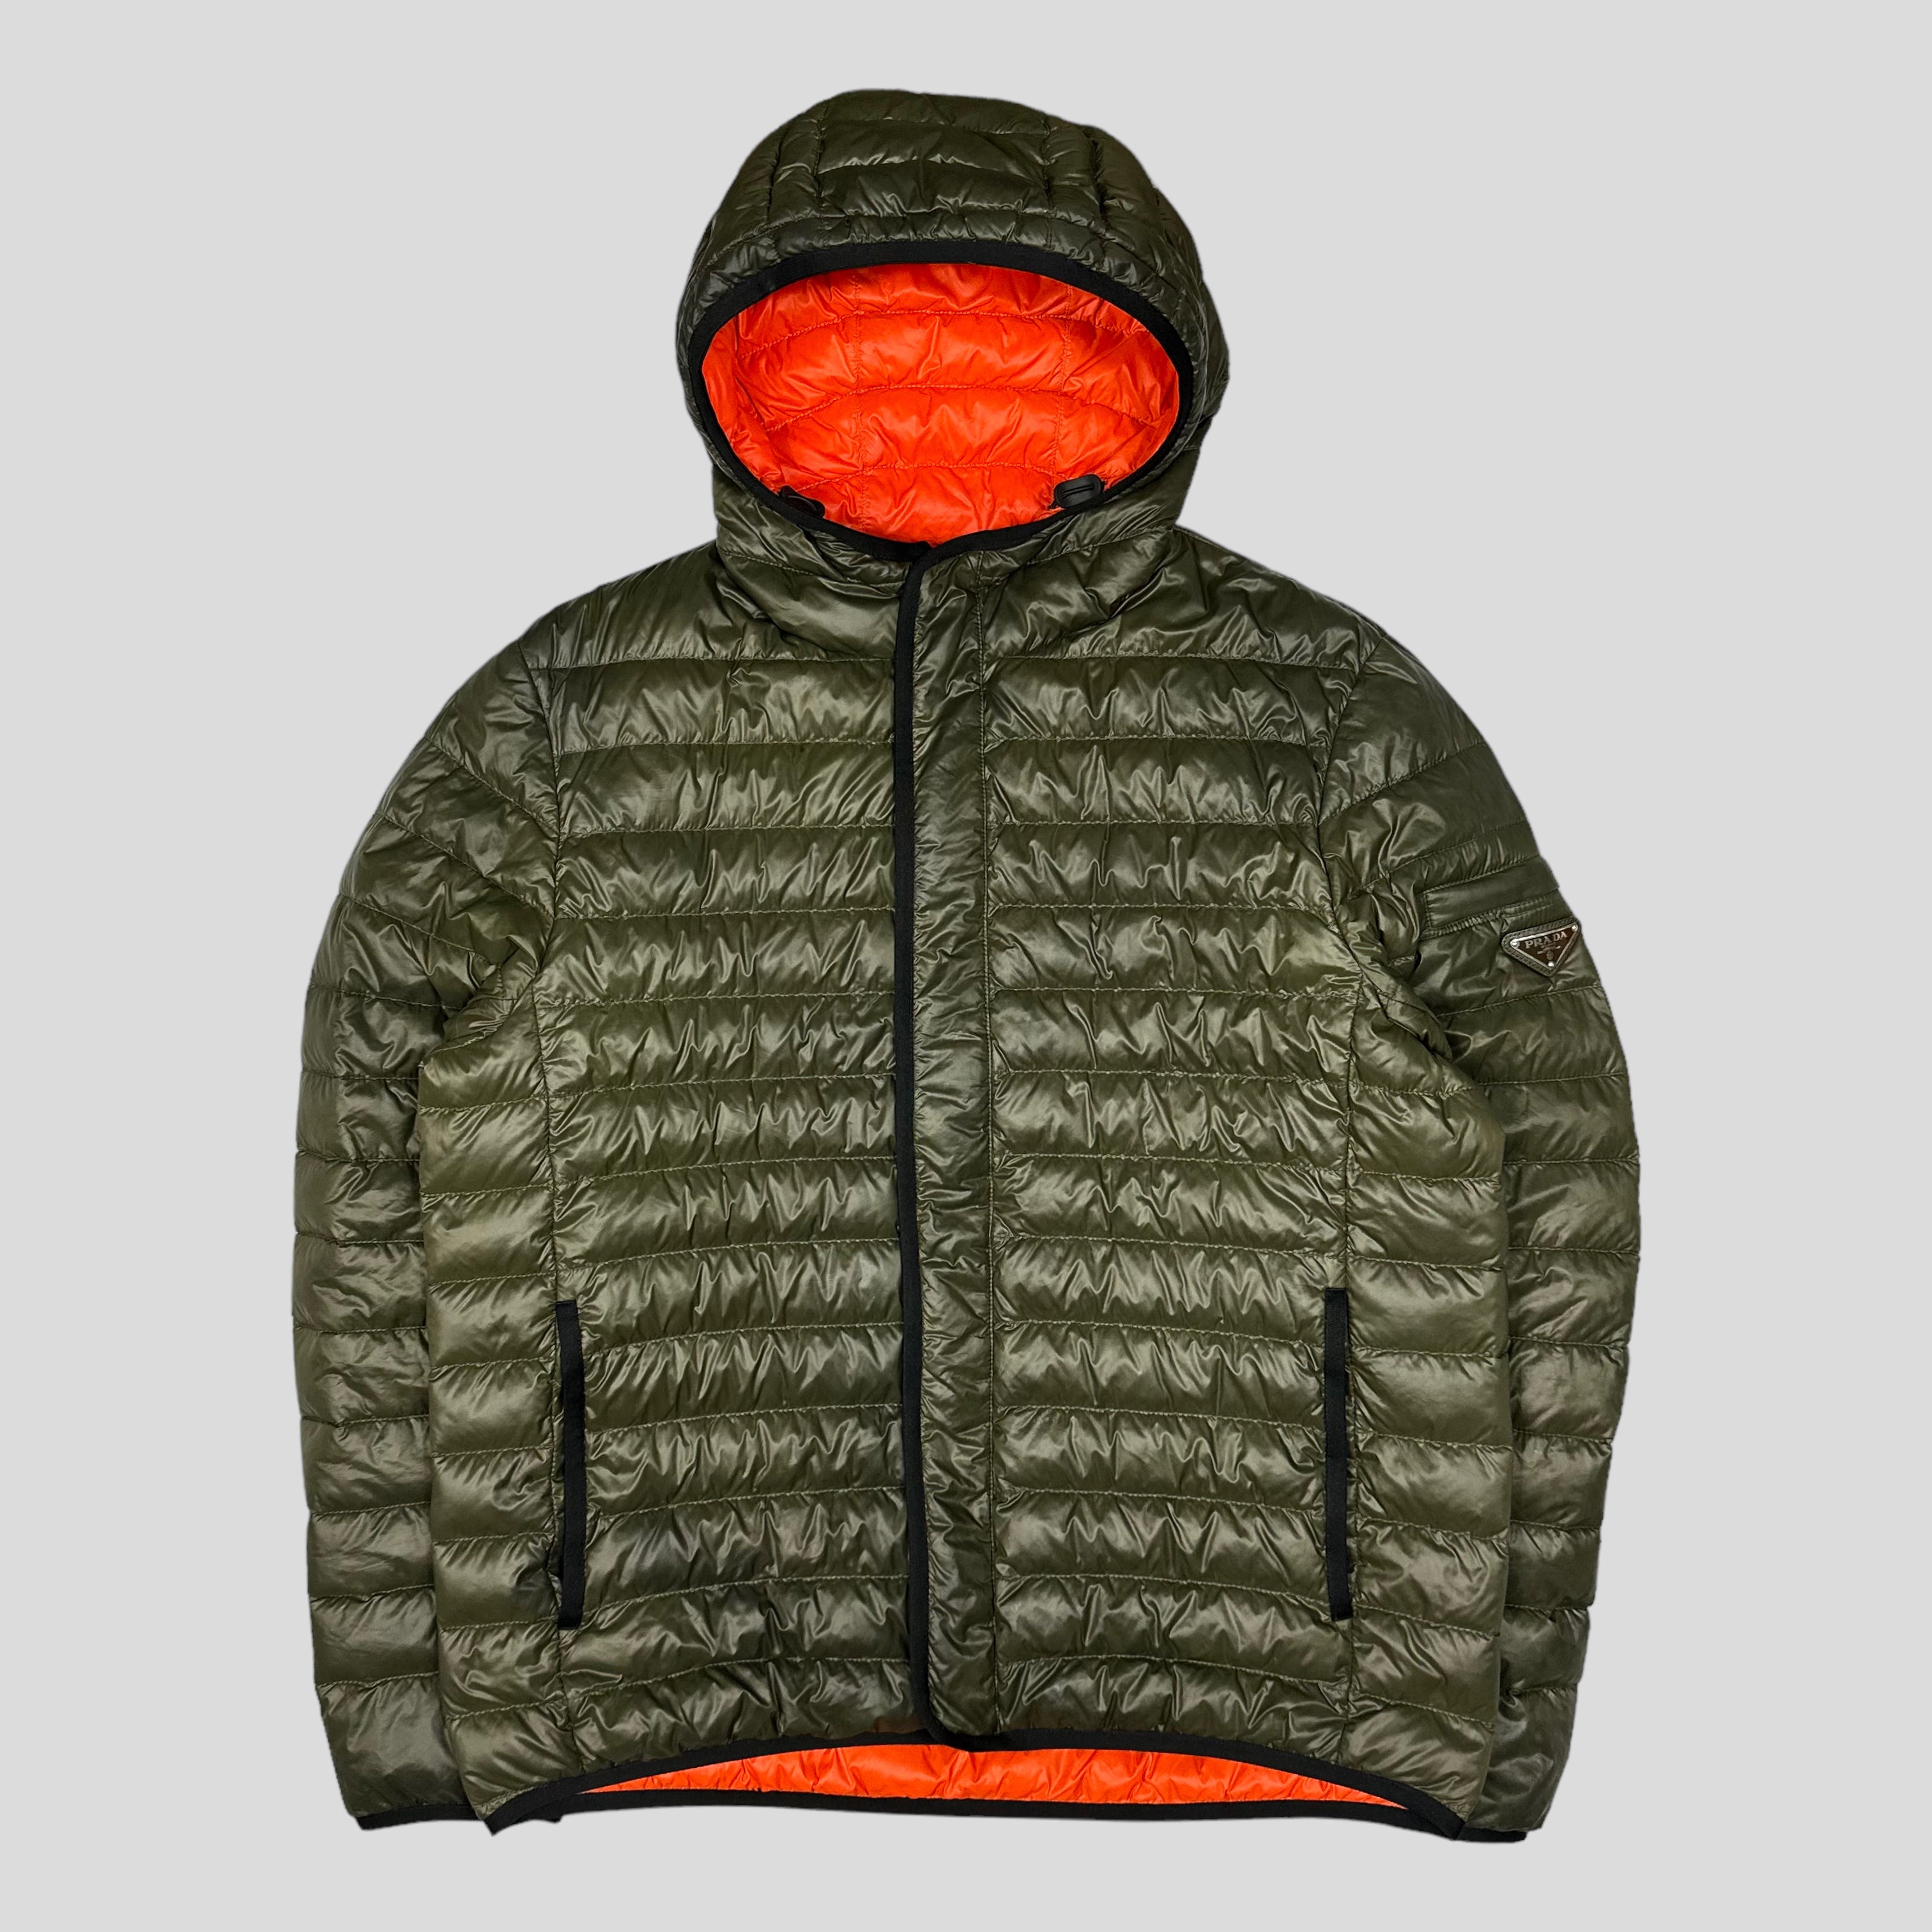 Jackets for Sale – Warmwaves